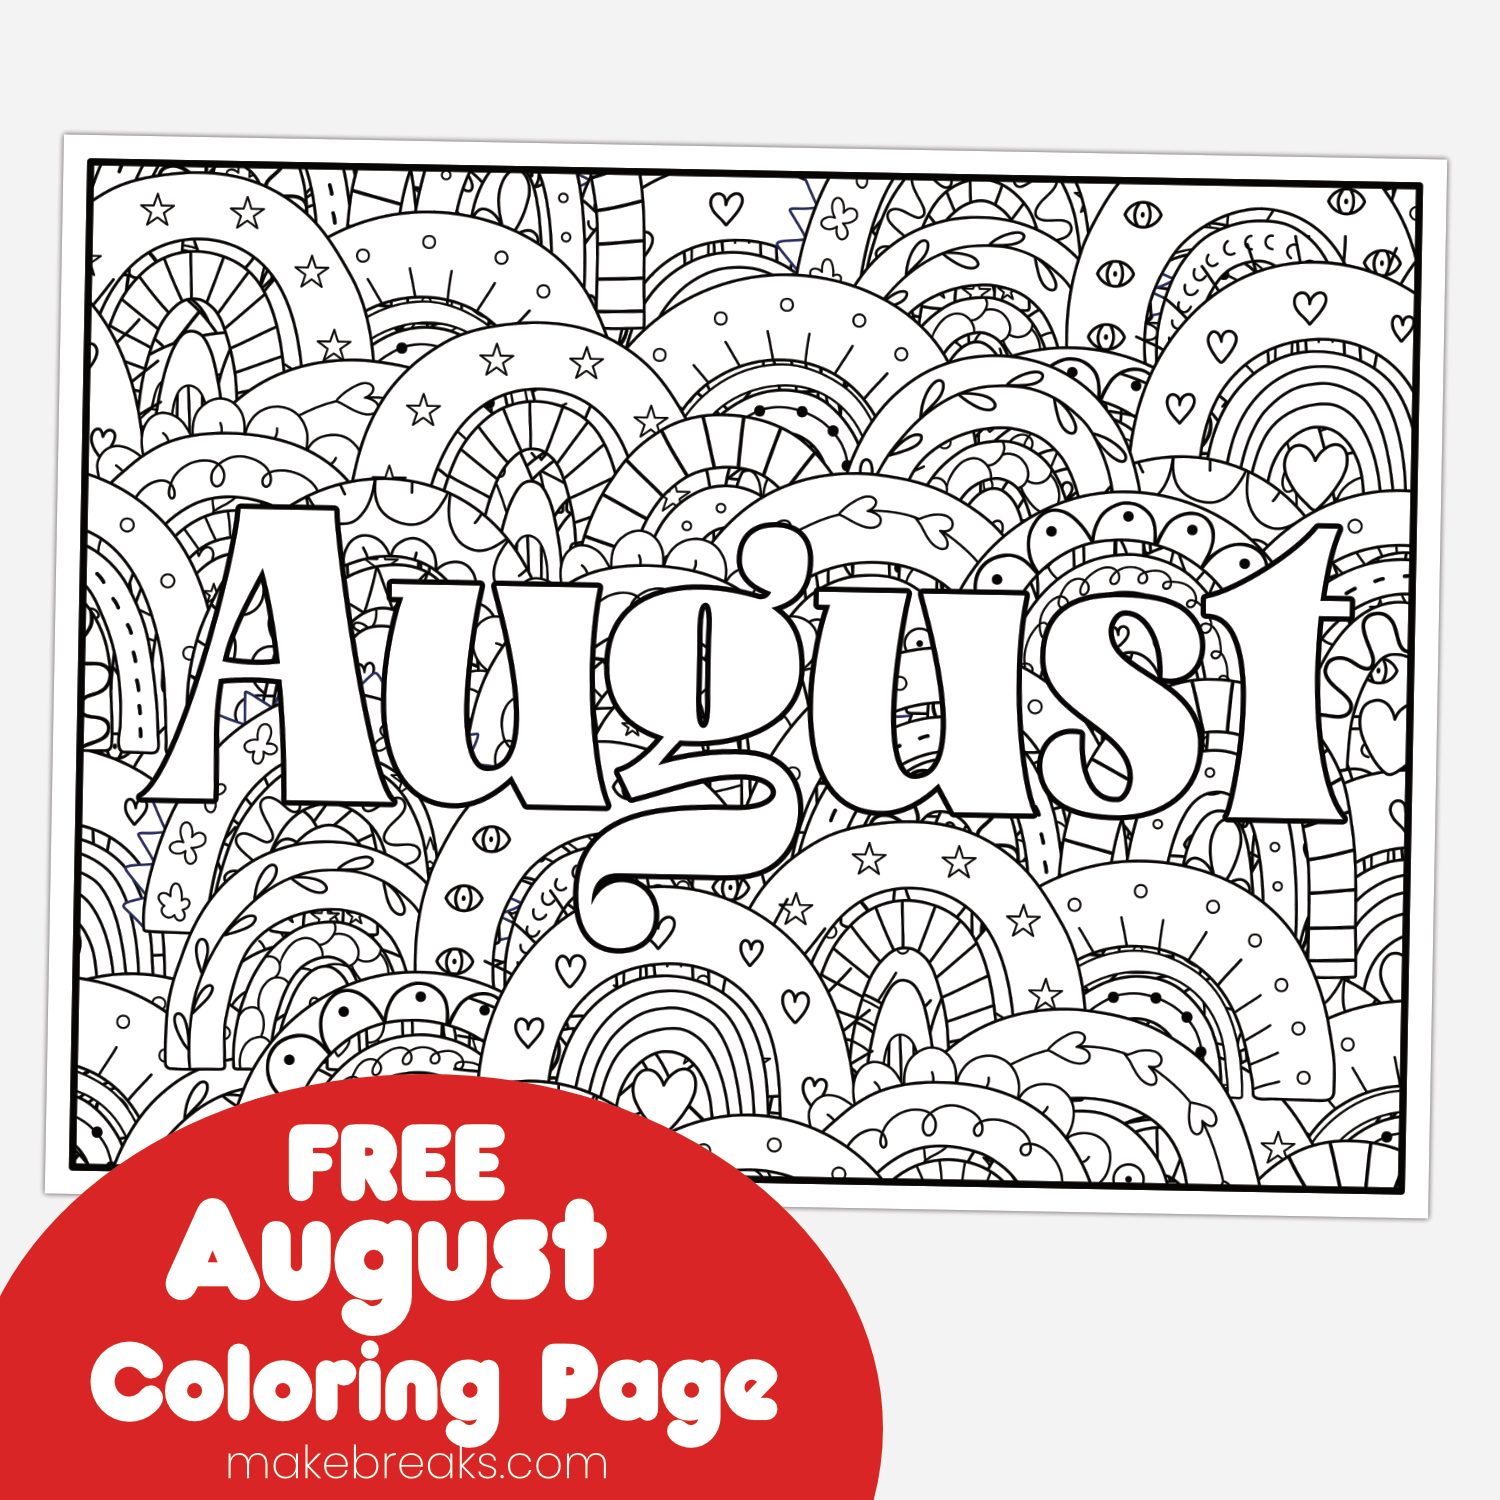 Free August Coloring Page